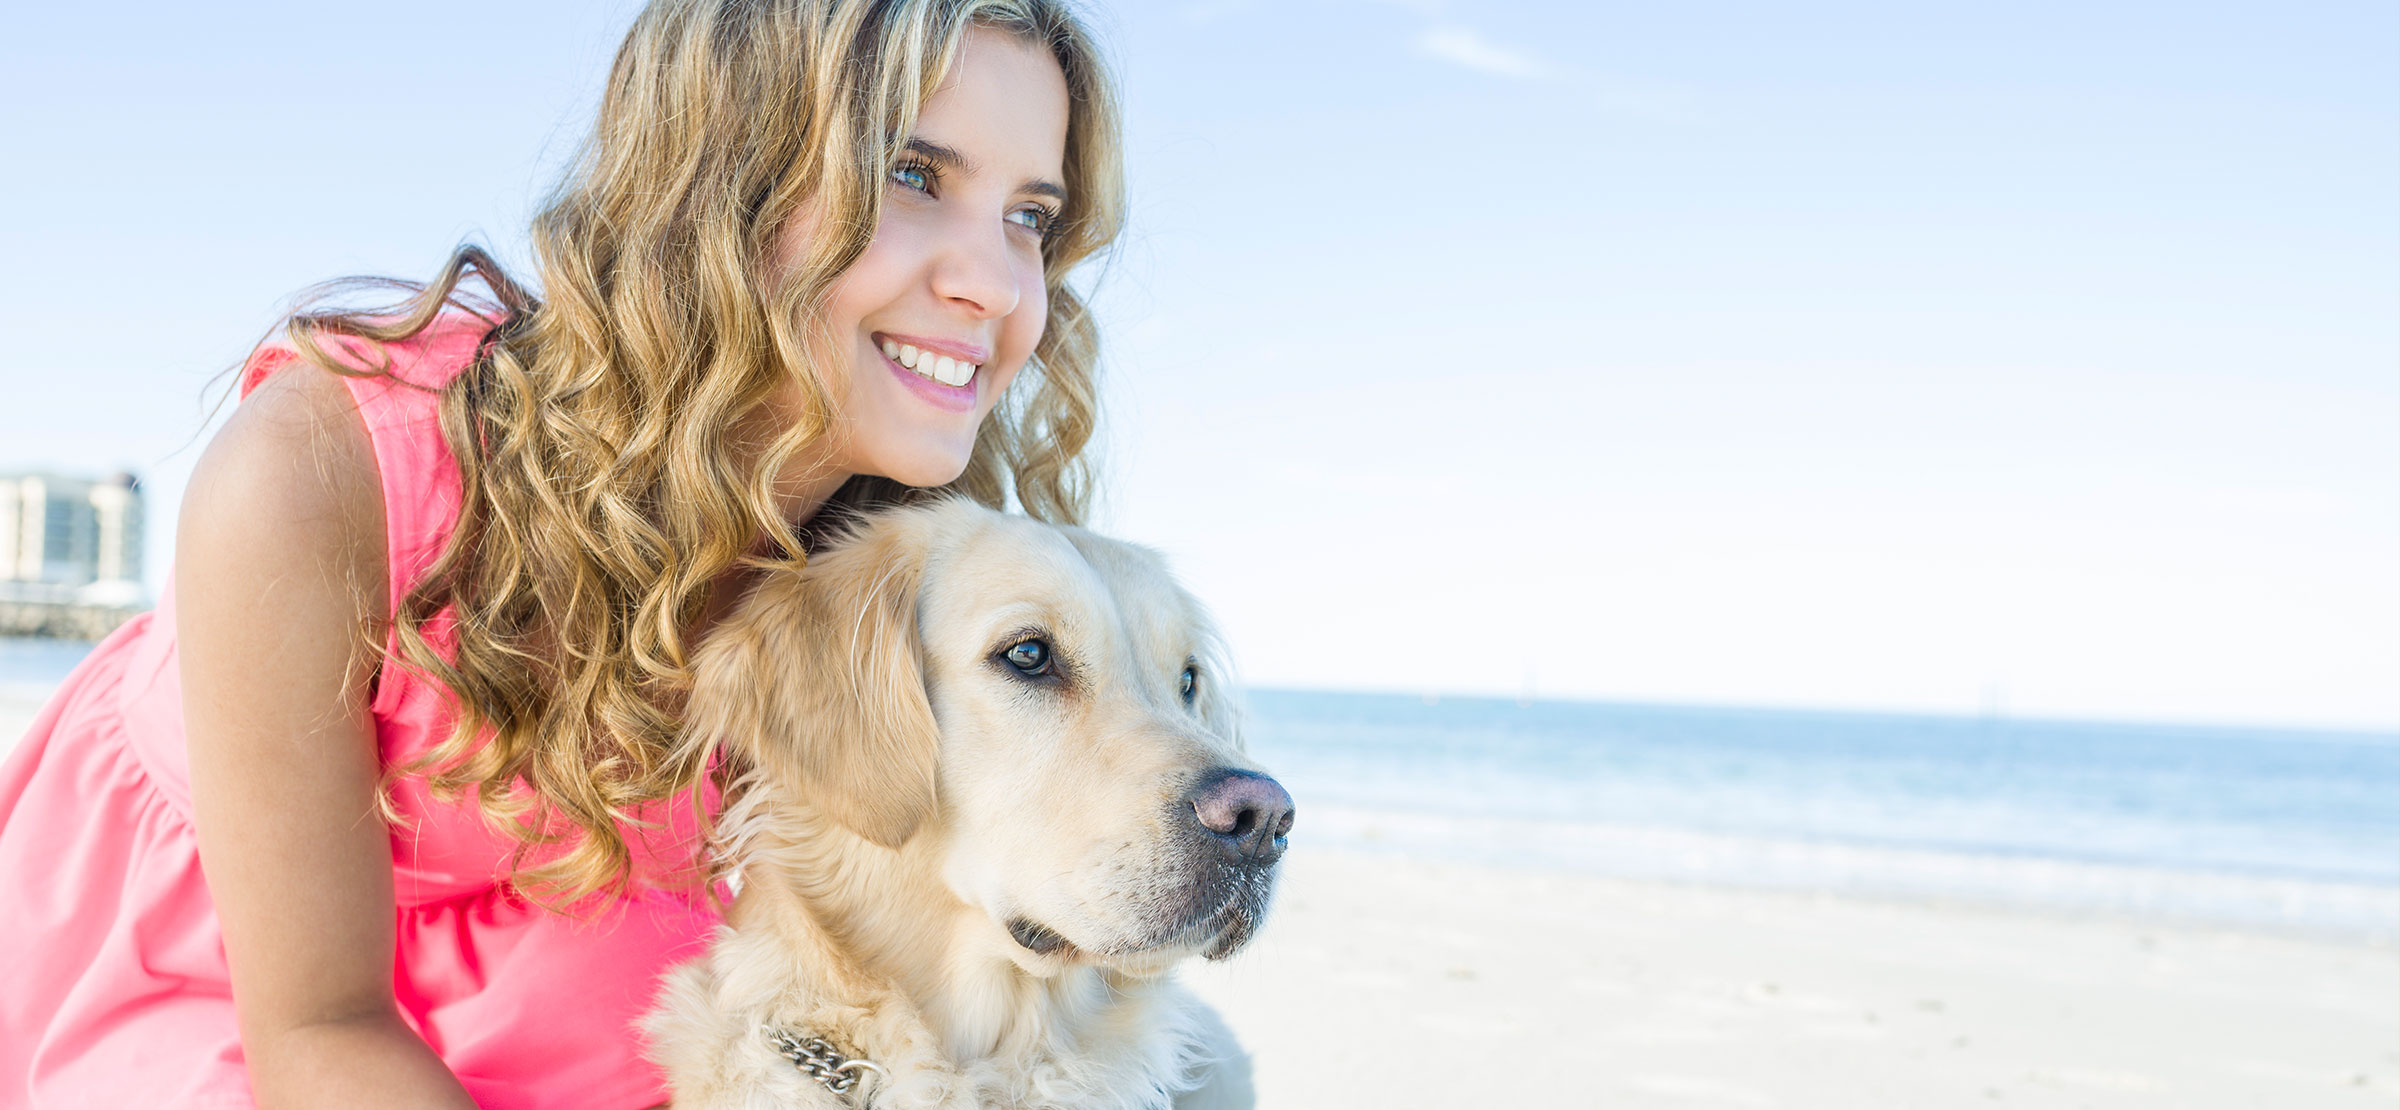 Young woman standing close to a yellow Guide Dog. Beach in the foreground.